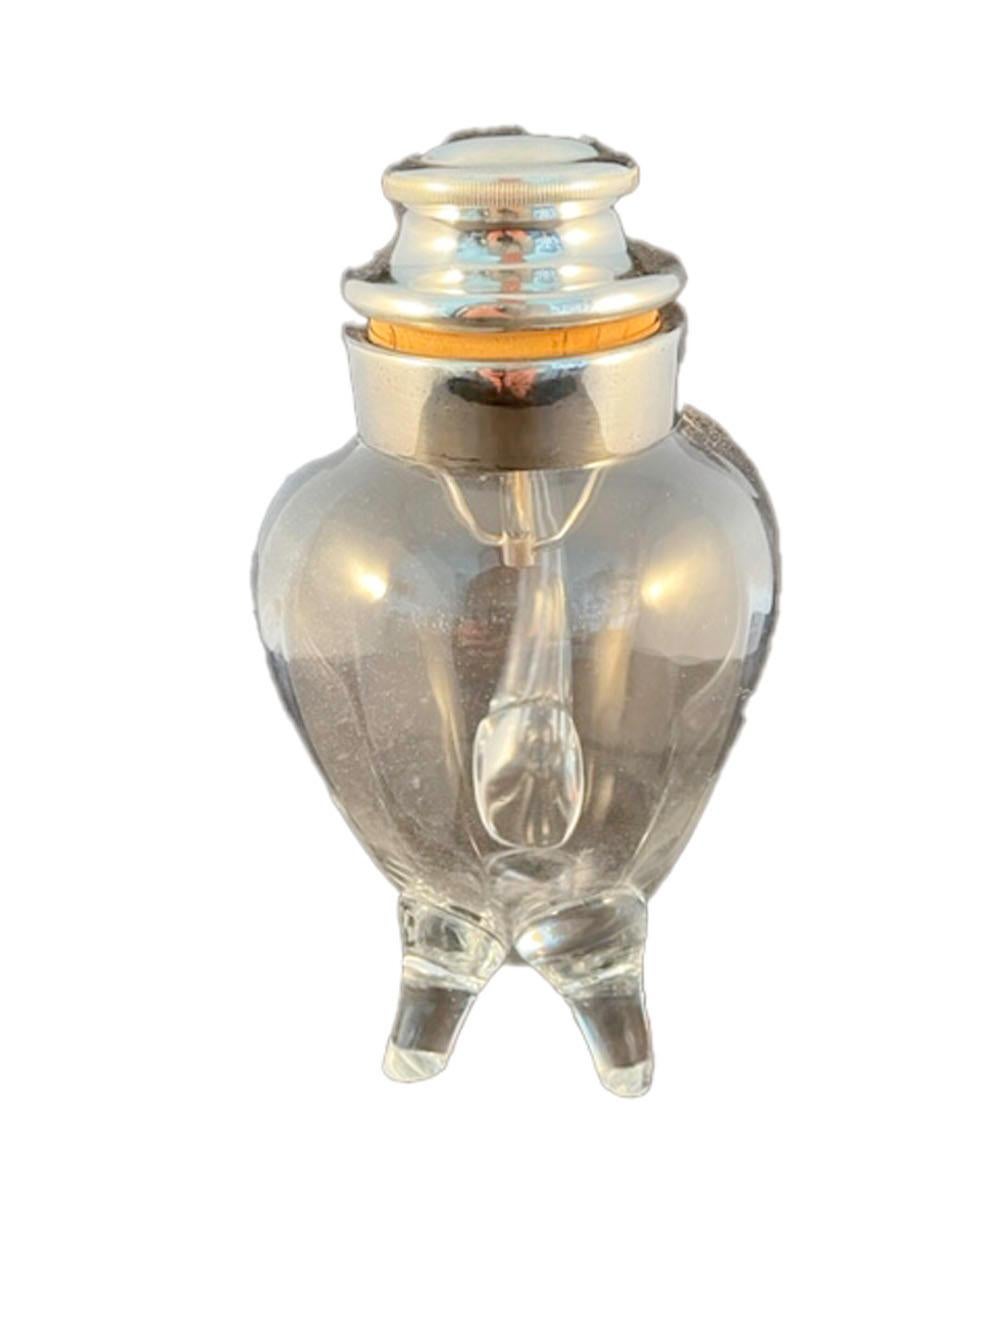 Unusual Art Deco Glass Cocktail Shaker of 'Duck' Form with Silver Plate Top 1